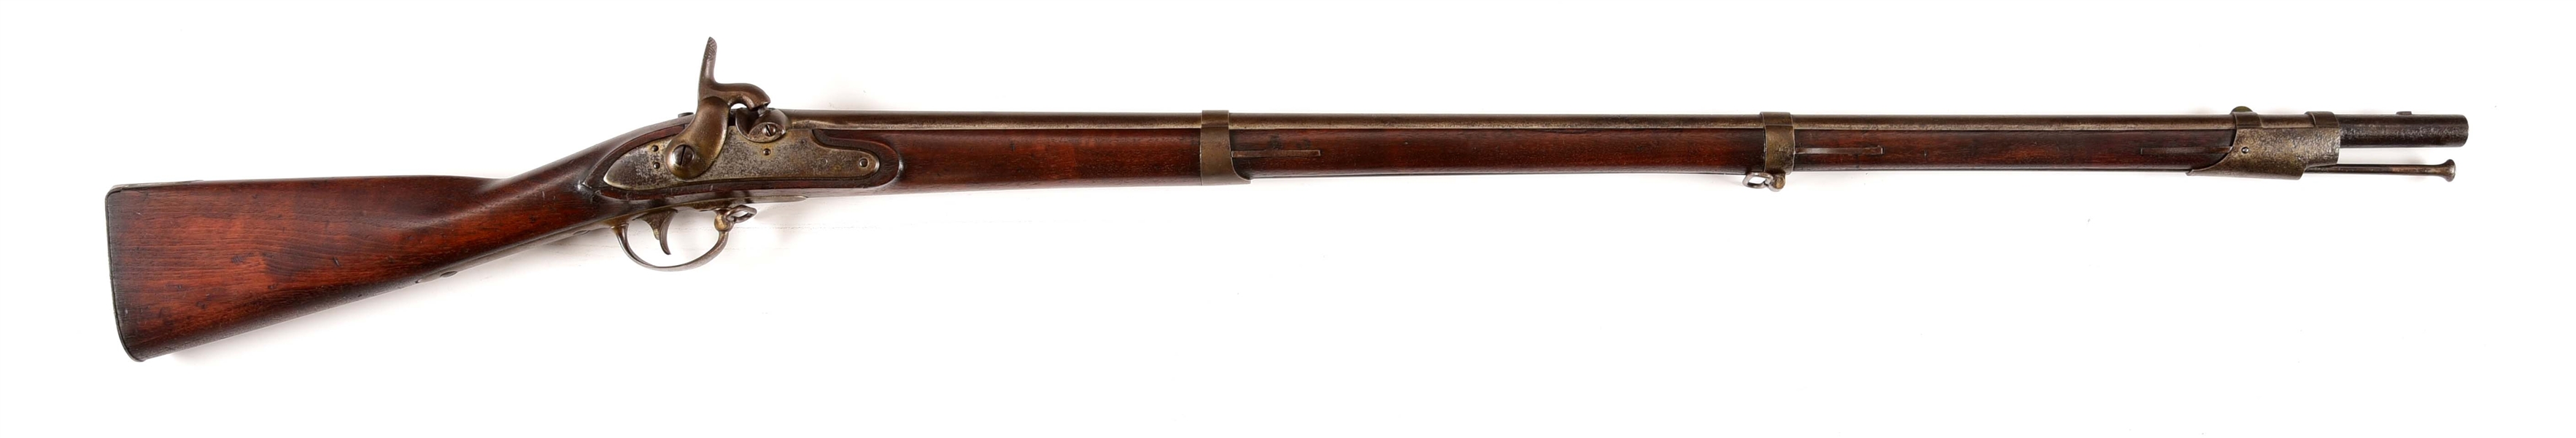 (A) US SPRINGFIELD MODEL 1816 MUSKET CONVERTED TO PERCUSSION.